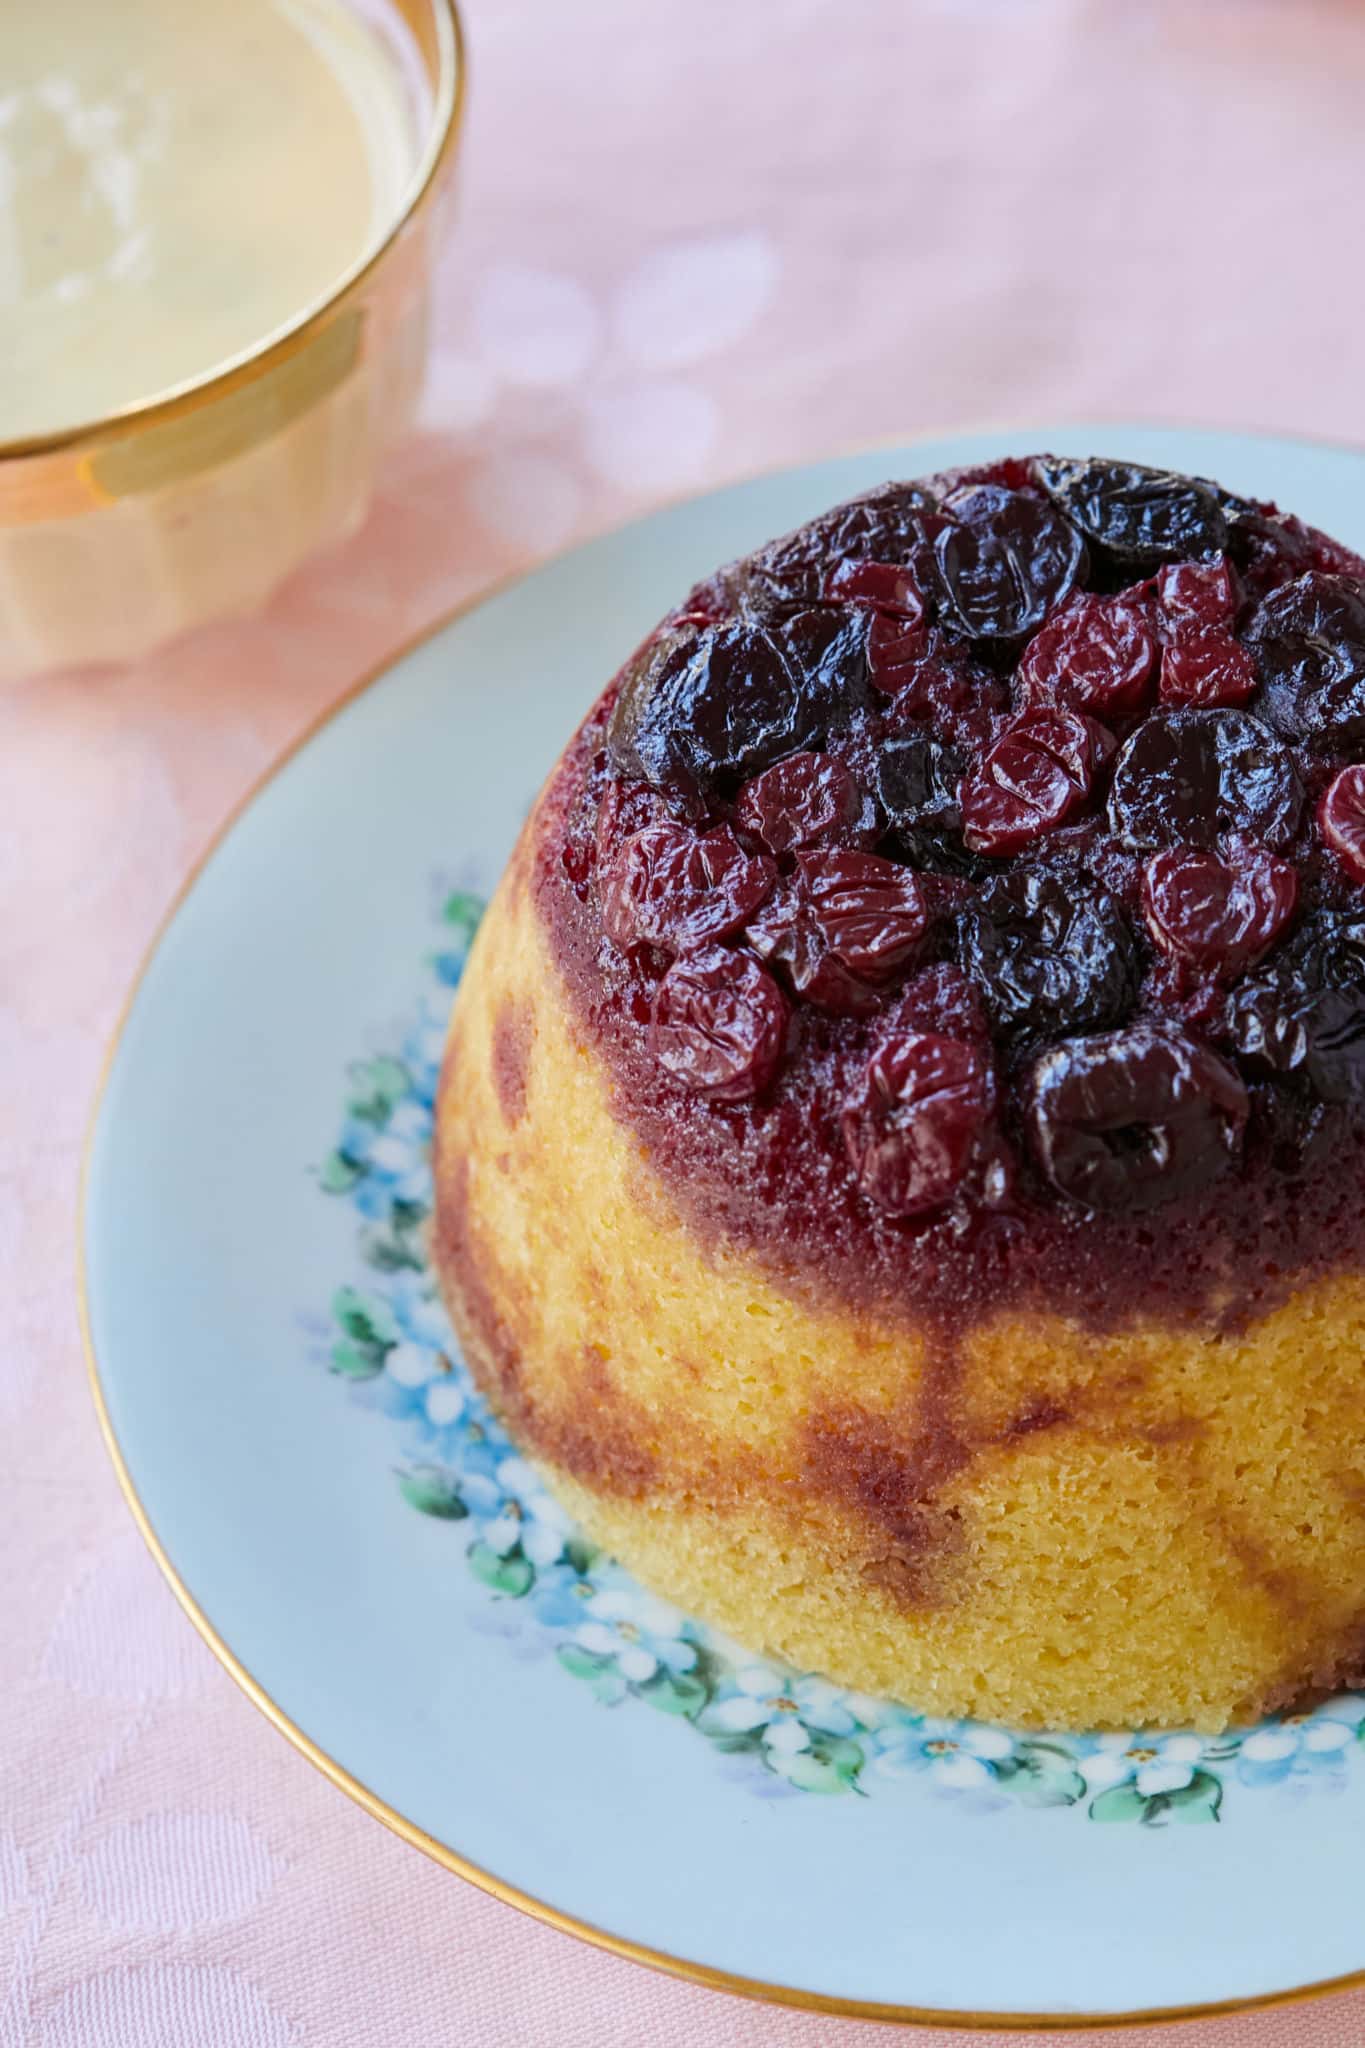 The cherries top of this steamed pudding recipe.